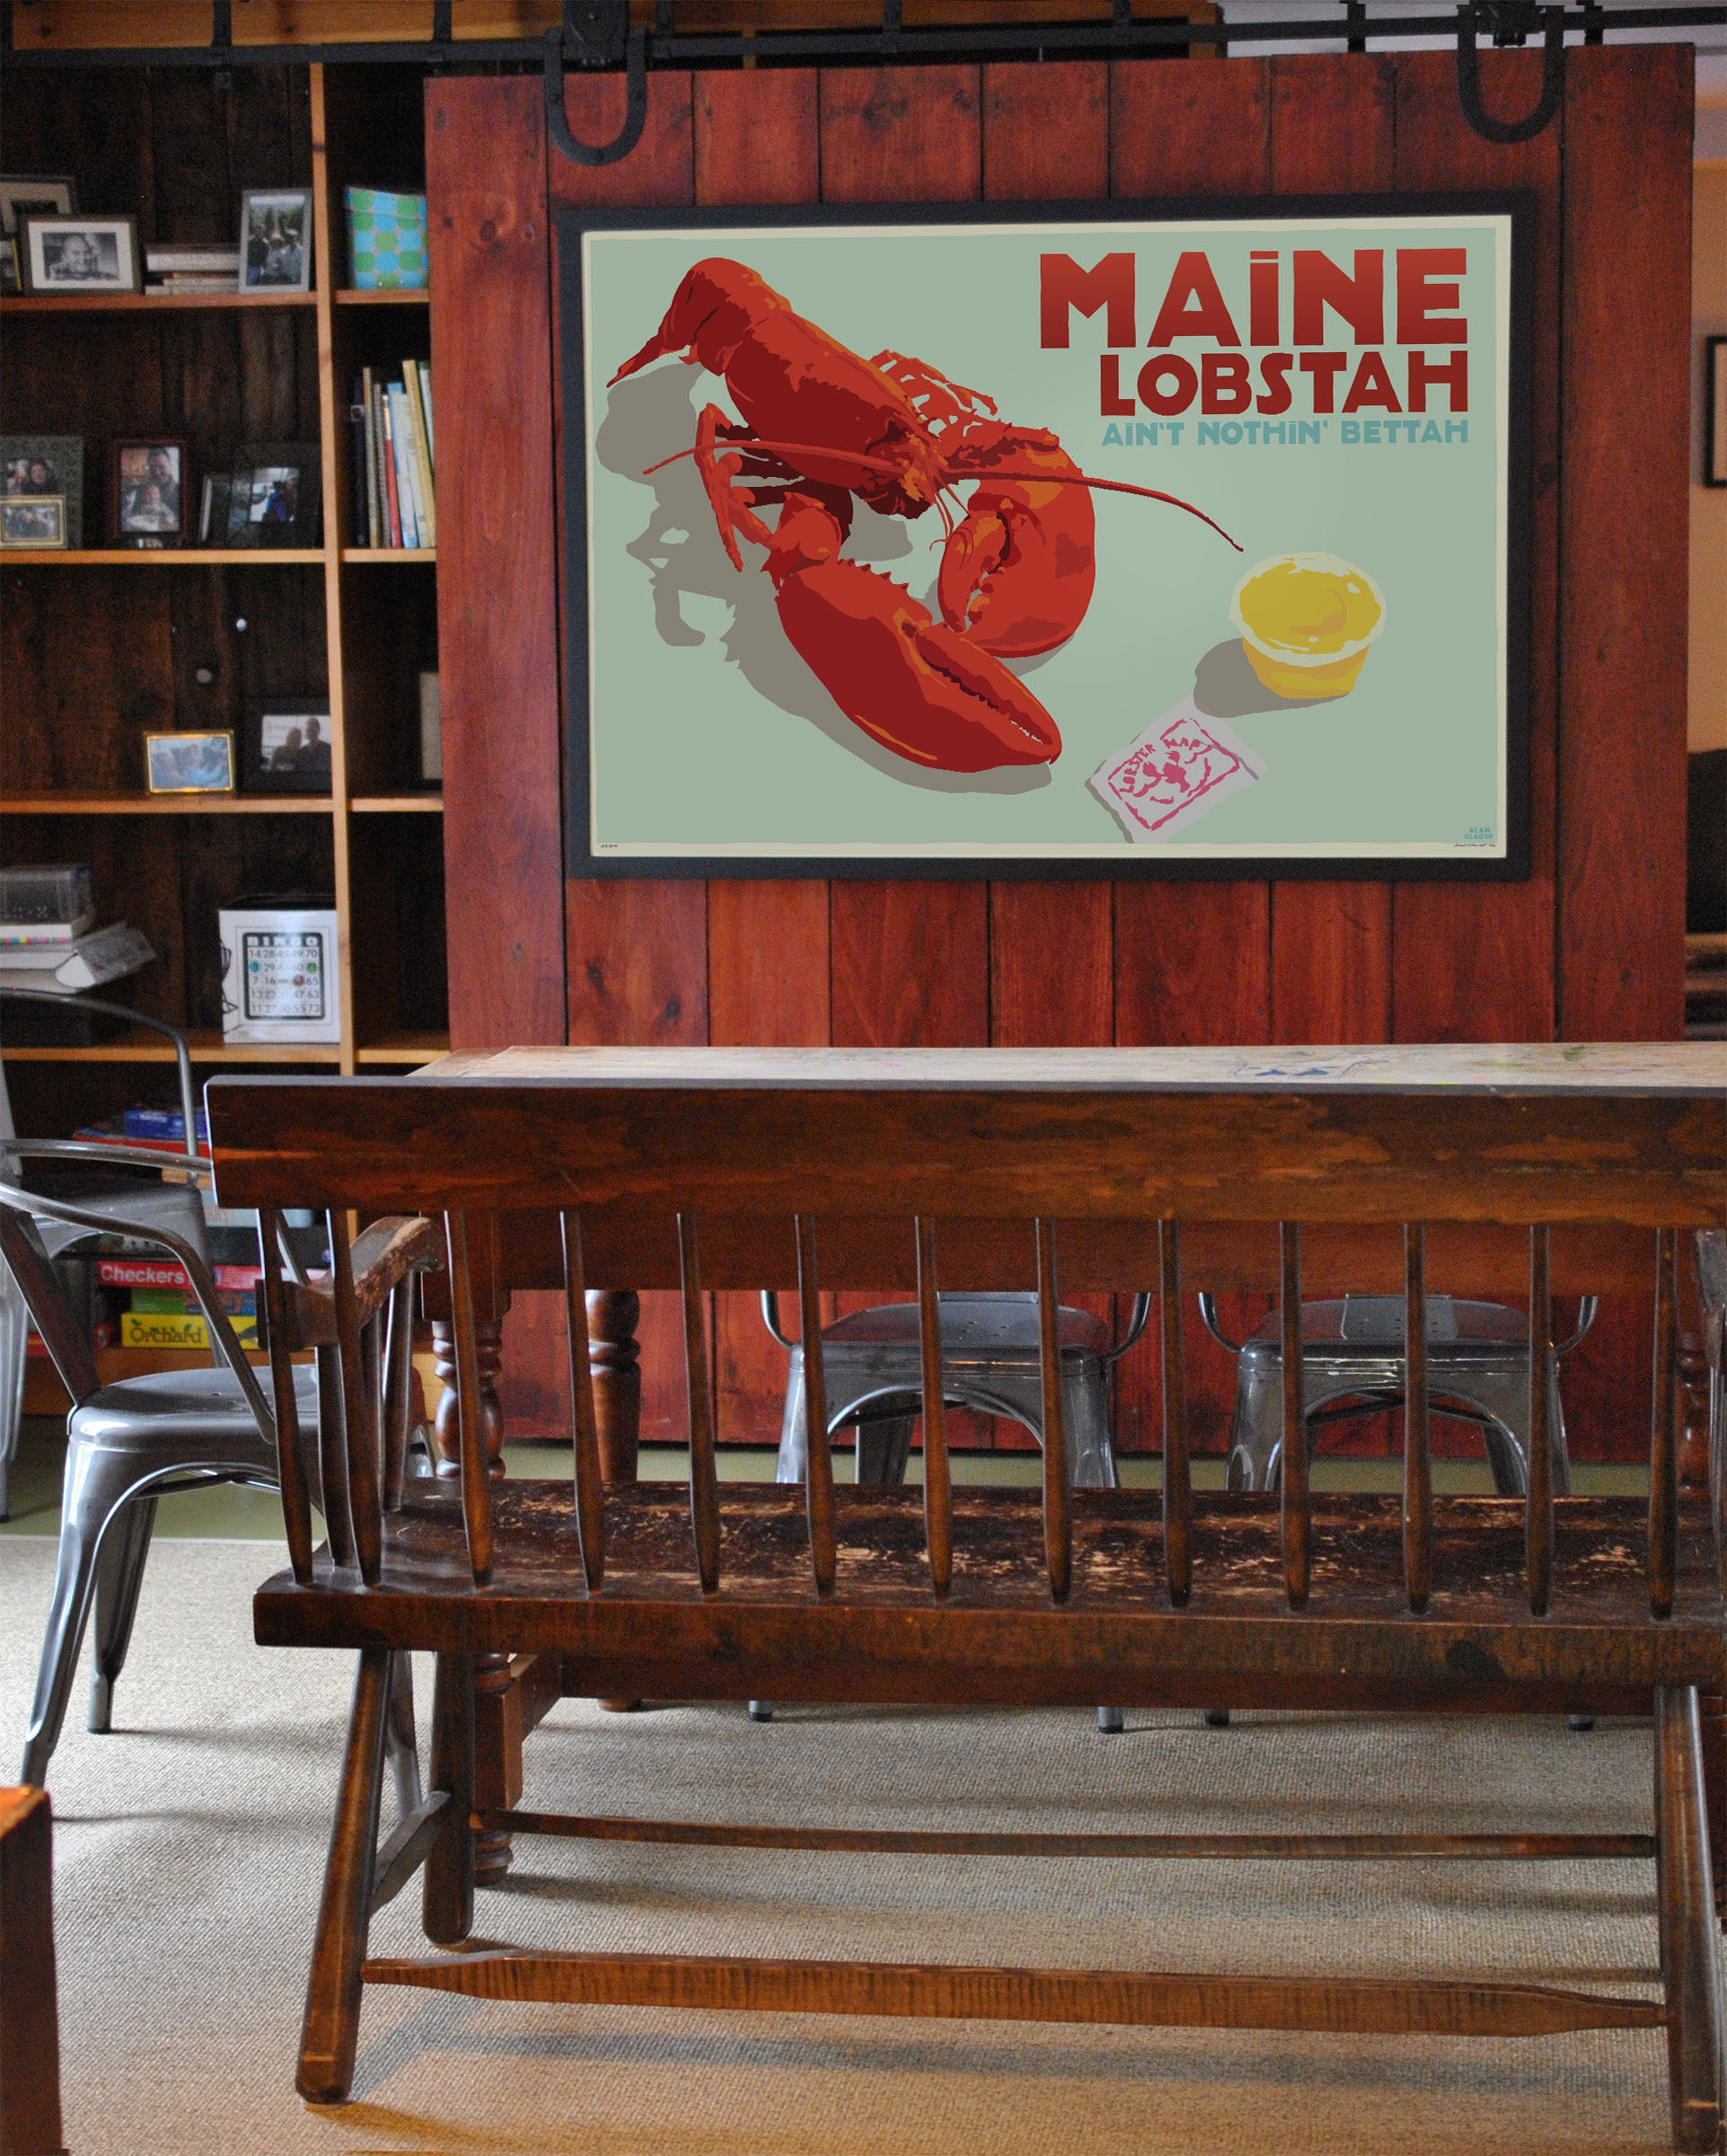 Maine Lobstah With Butter Art Print 36" x 53" Horizontal Framed Wall Poster By Alan Claude